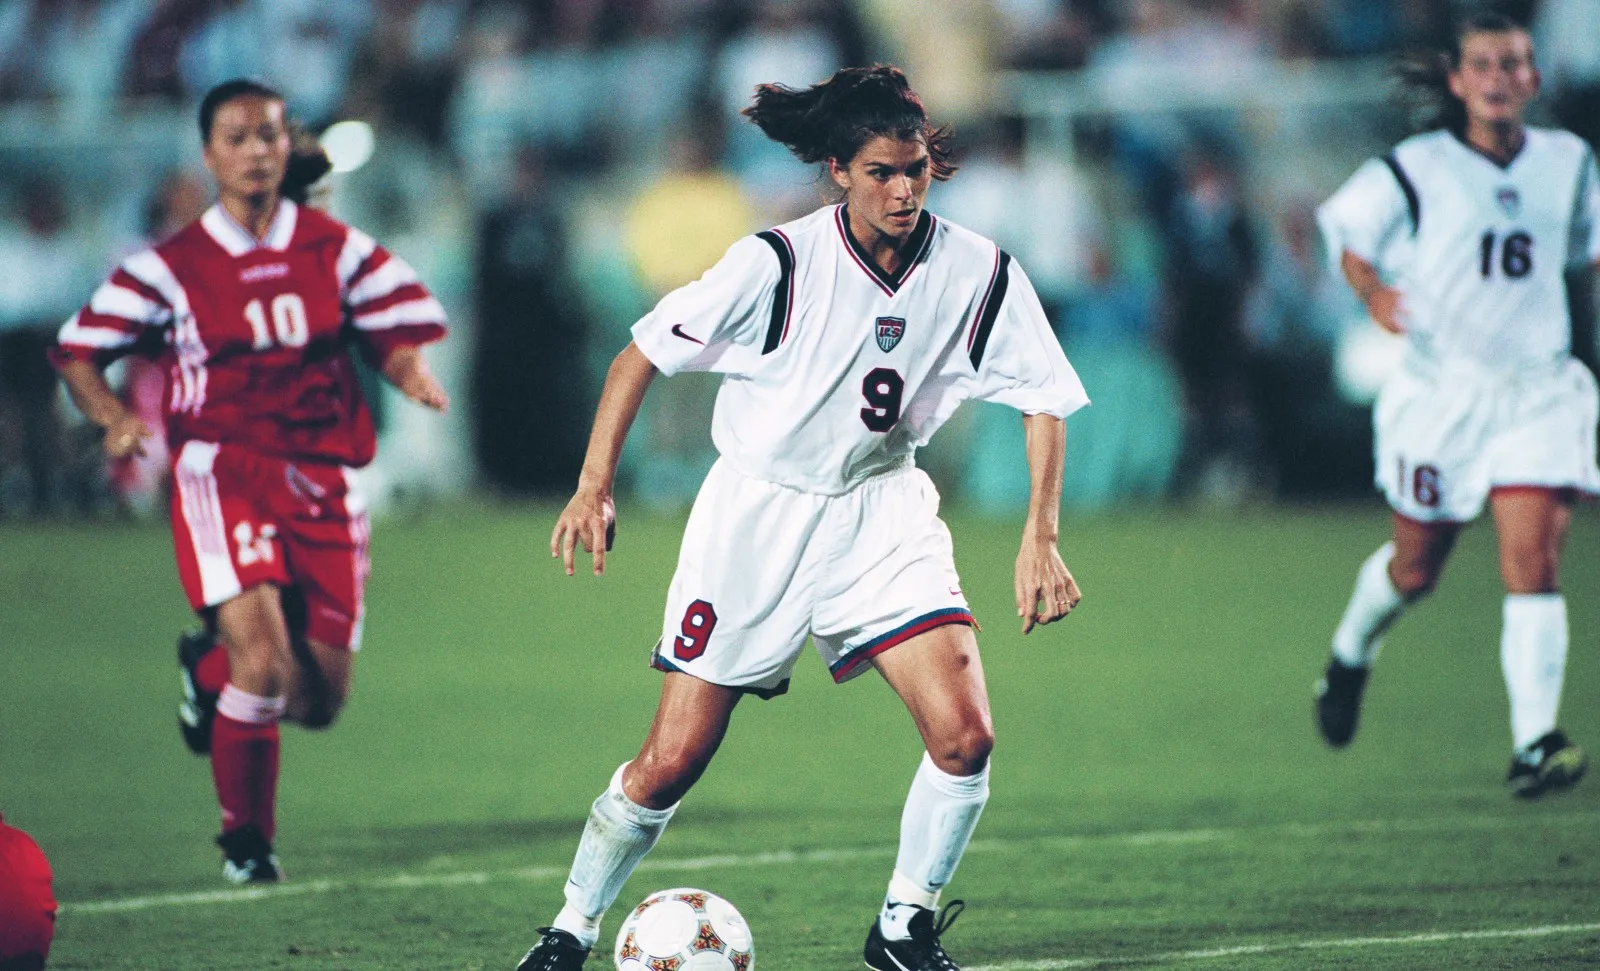 Mia Hamm The Queen of Football